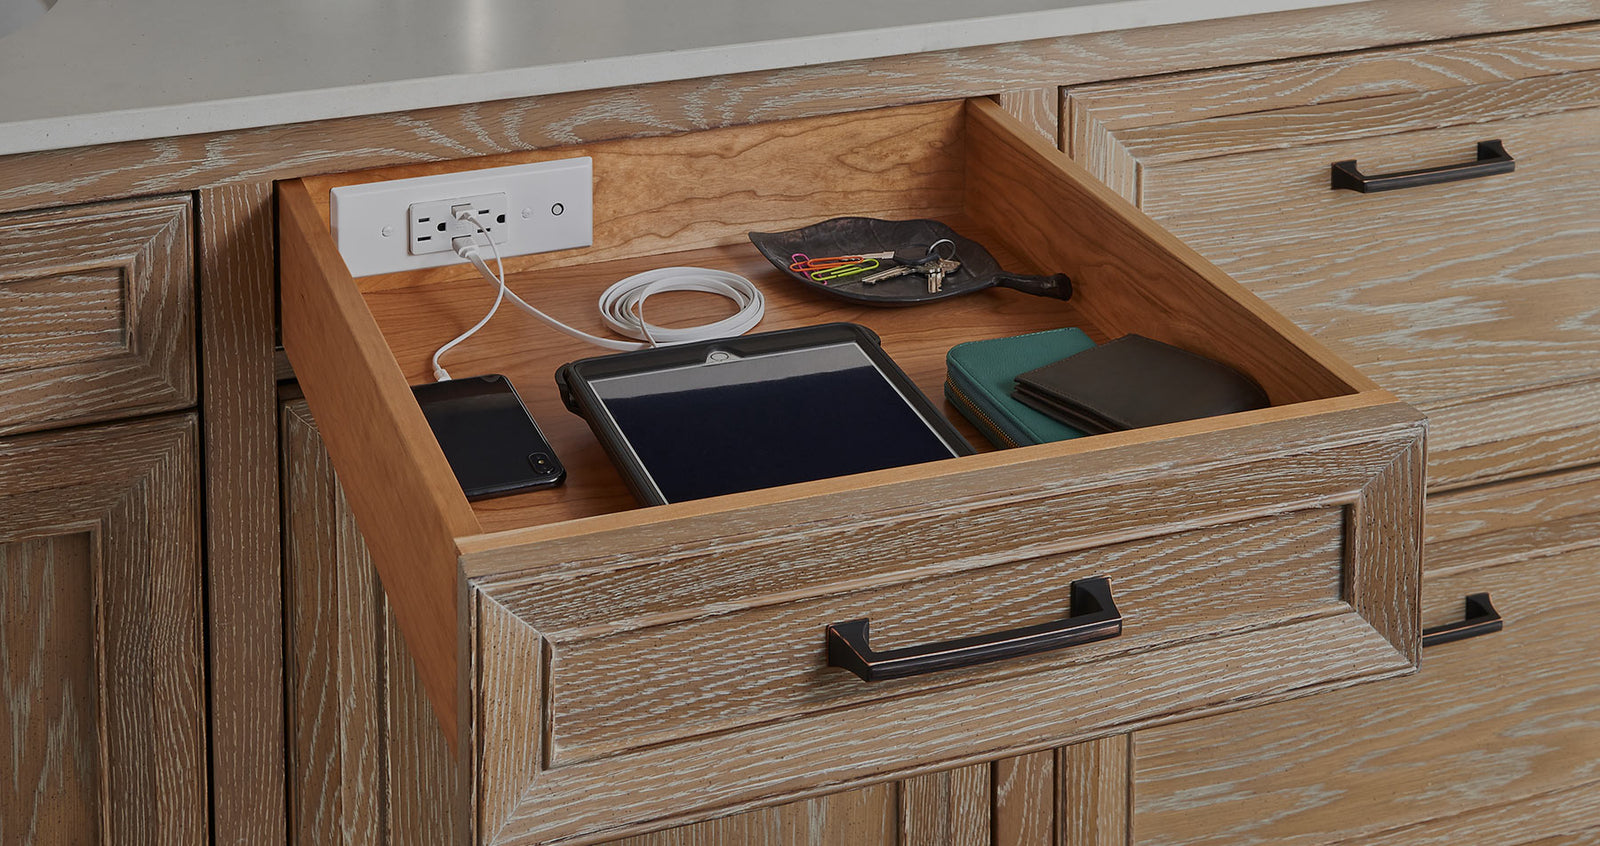 How To Specify And Plan An In Drawer Outlet Into Your Projects Docking Drawer